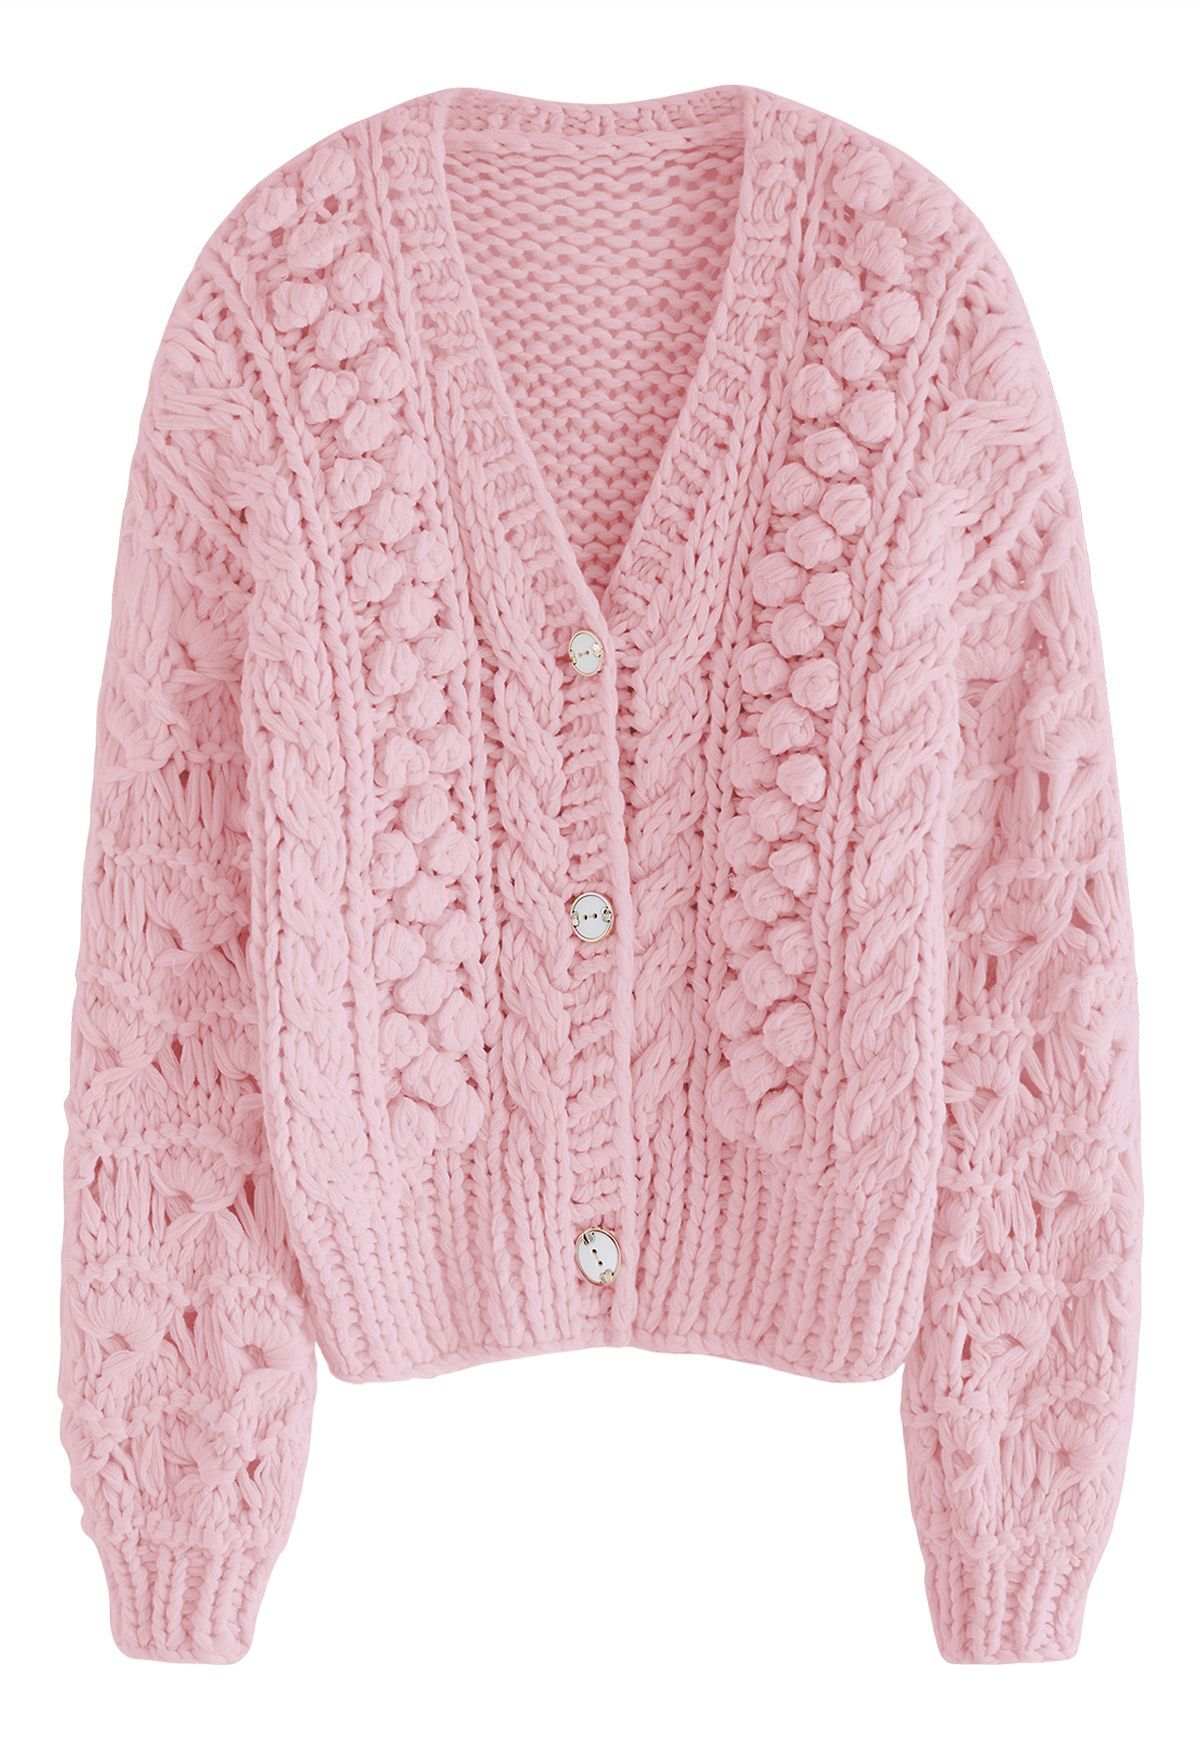 Button Up Pointelle Sleeve Pom-Pom Knit Cardigan in Pink | Chicwish